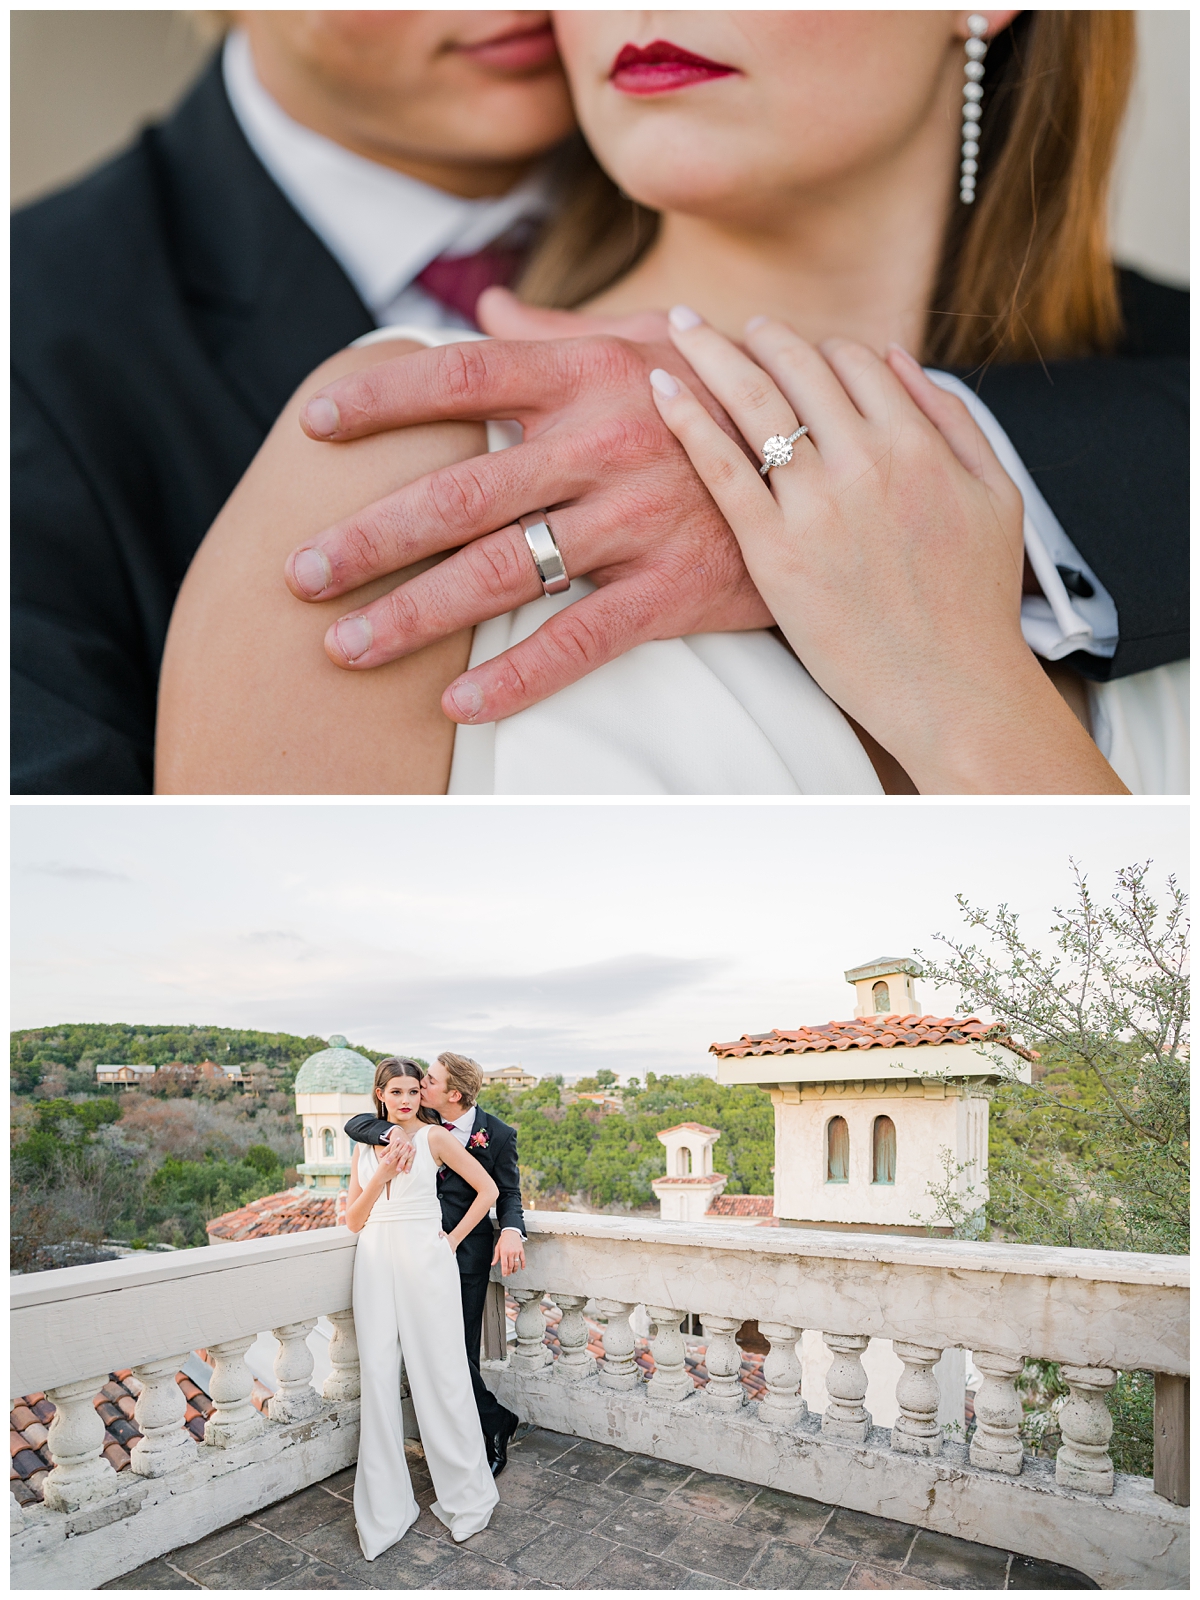 Form to Feeling Engagement Rings for Austin Texas Couples